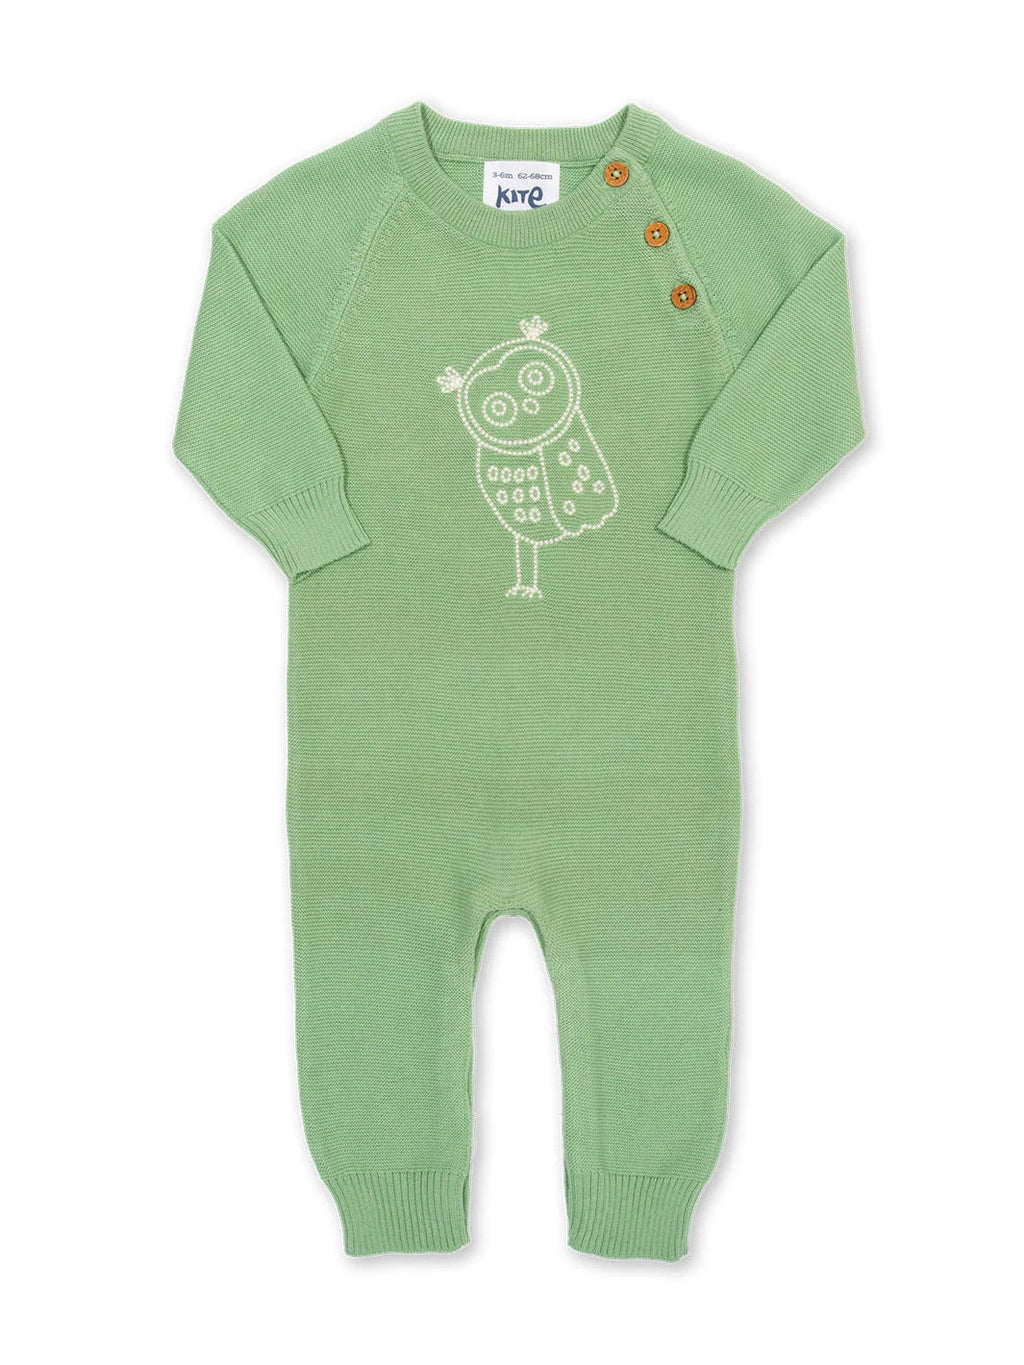 Kite Clothing  Baby Sage Green Owlet Knit Romper